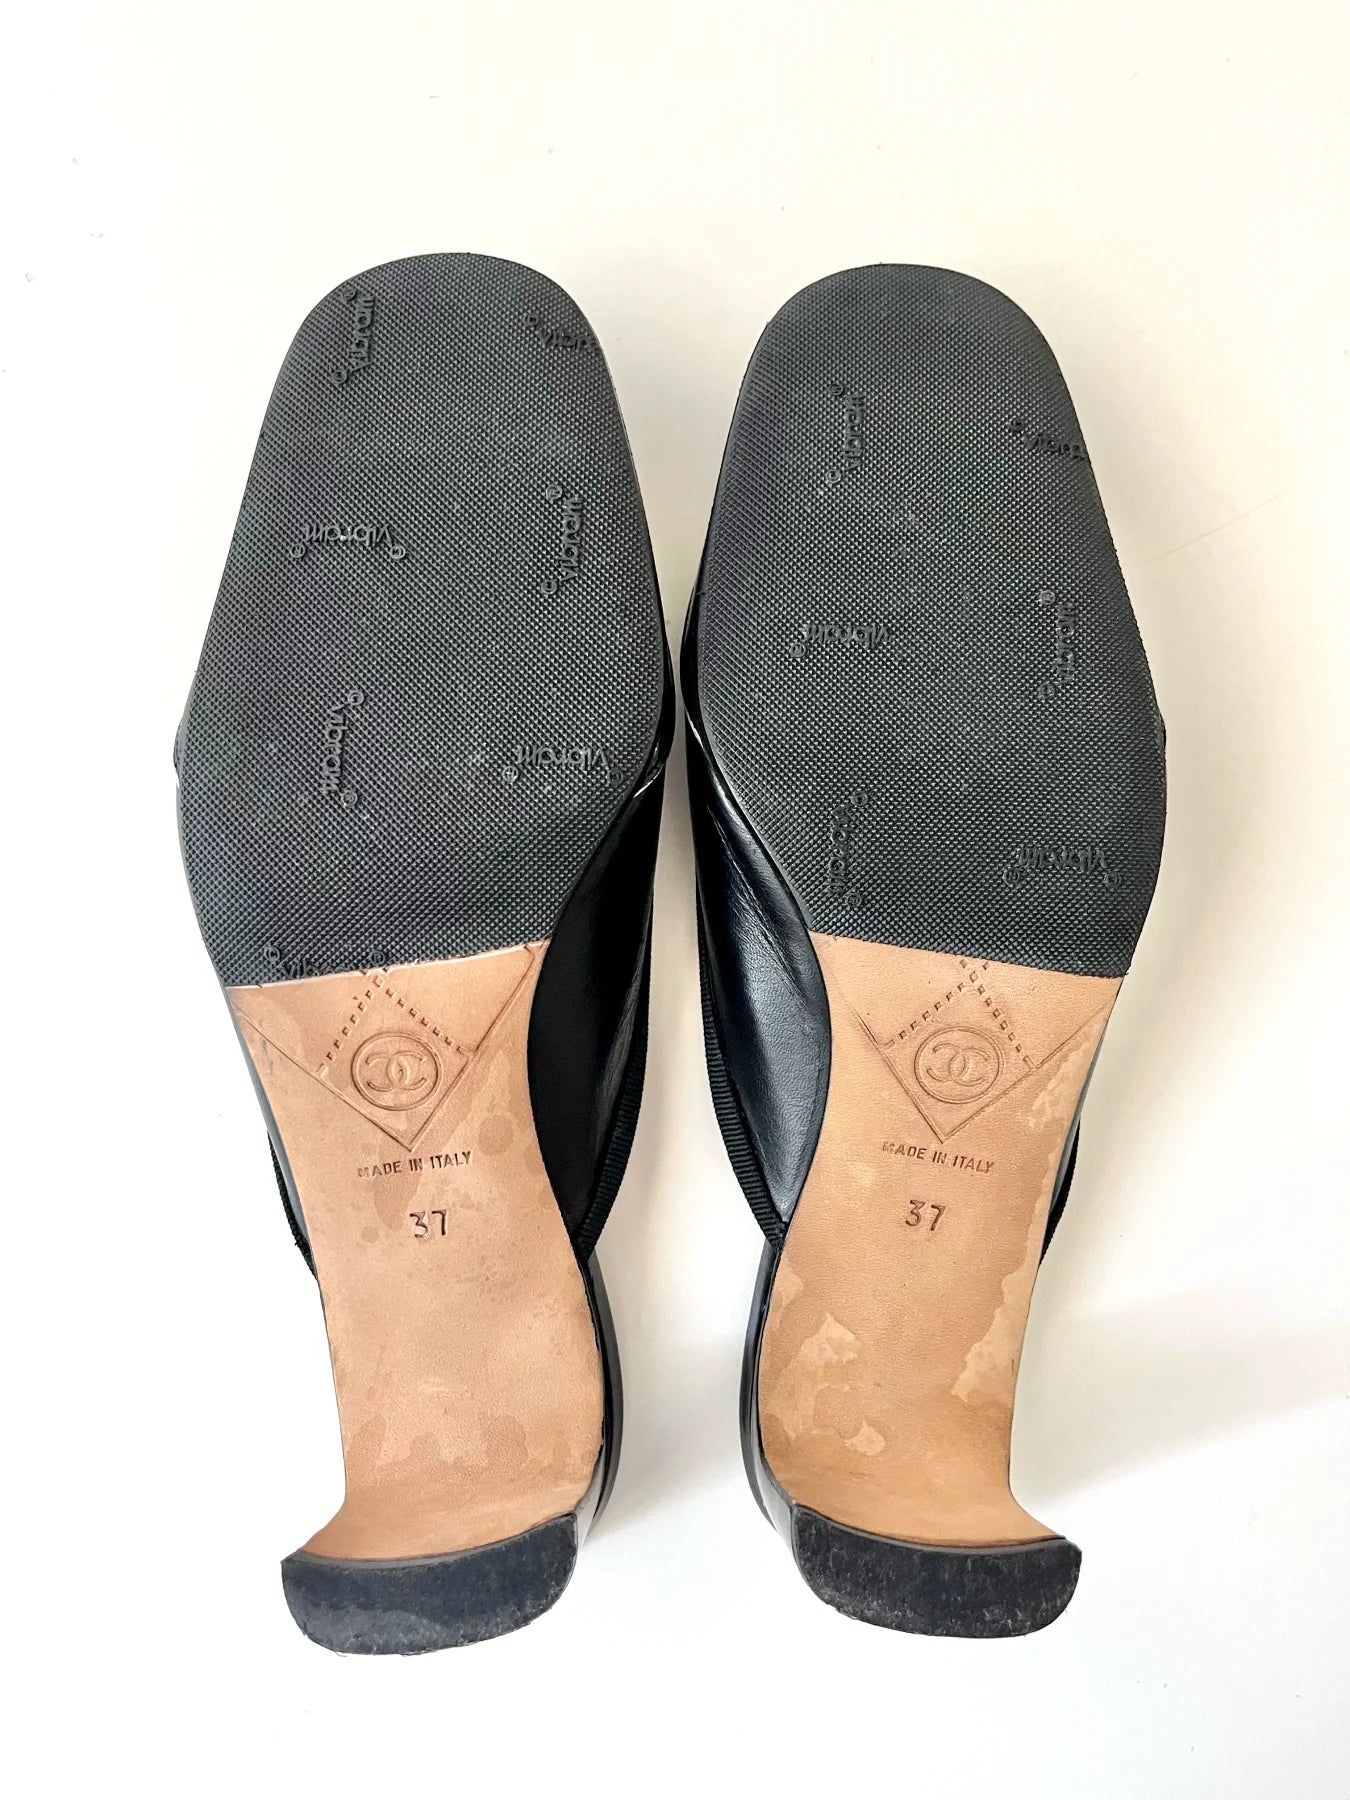 CHANEL Leather Bow Accents Mules, 37